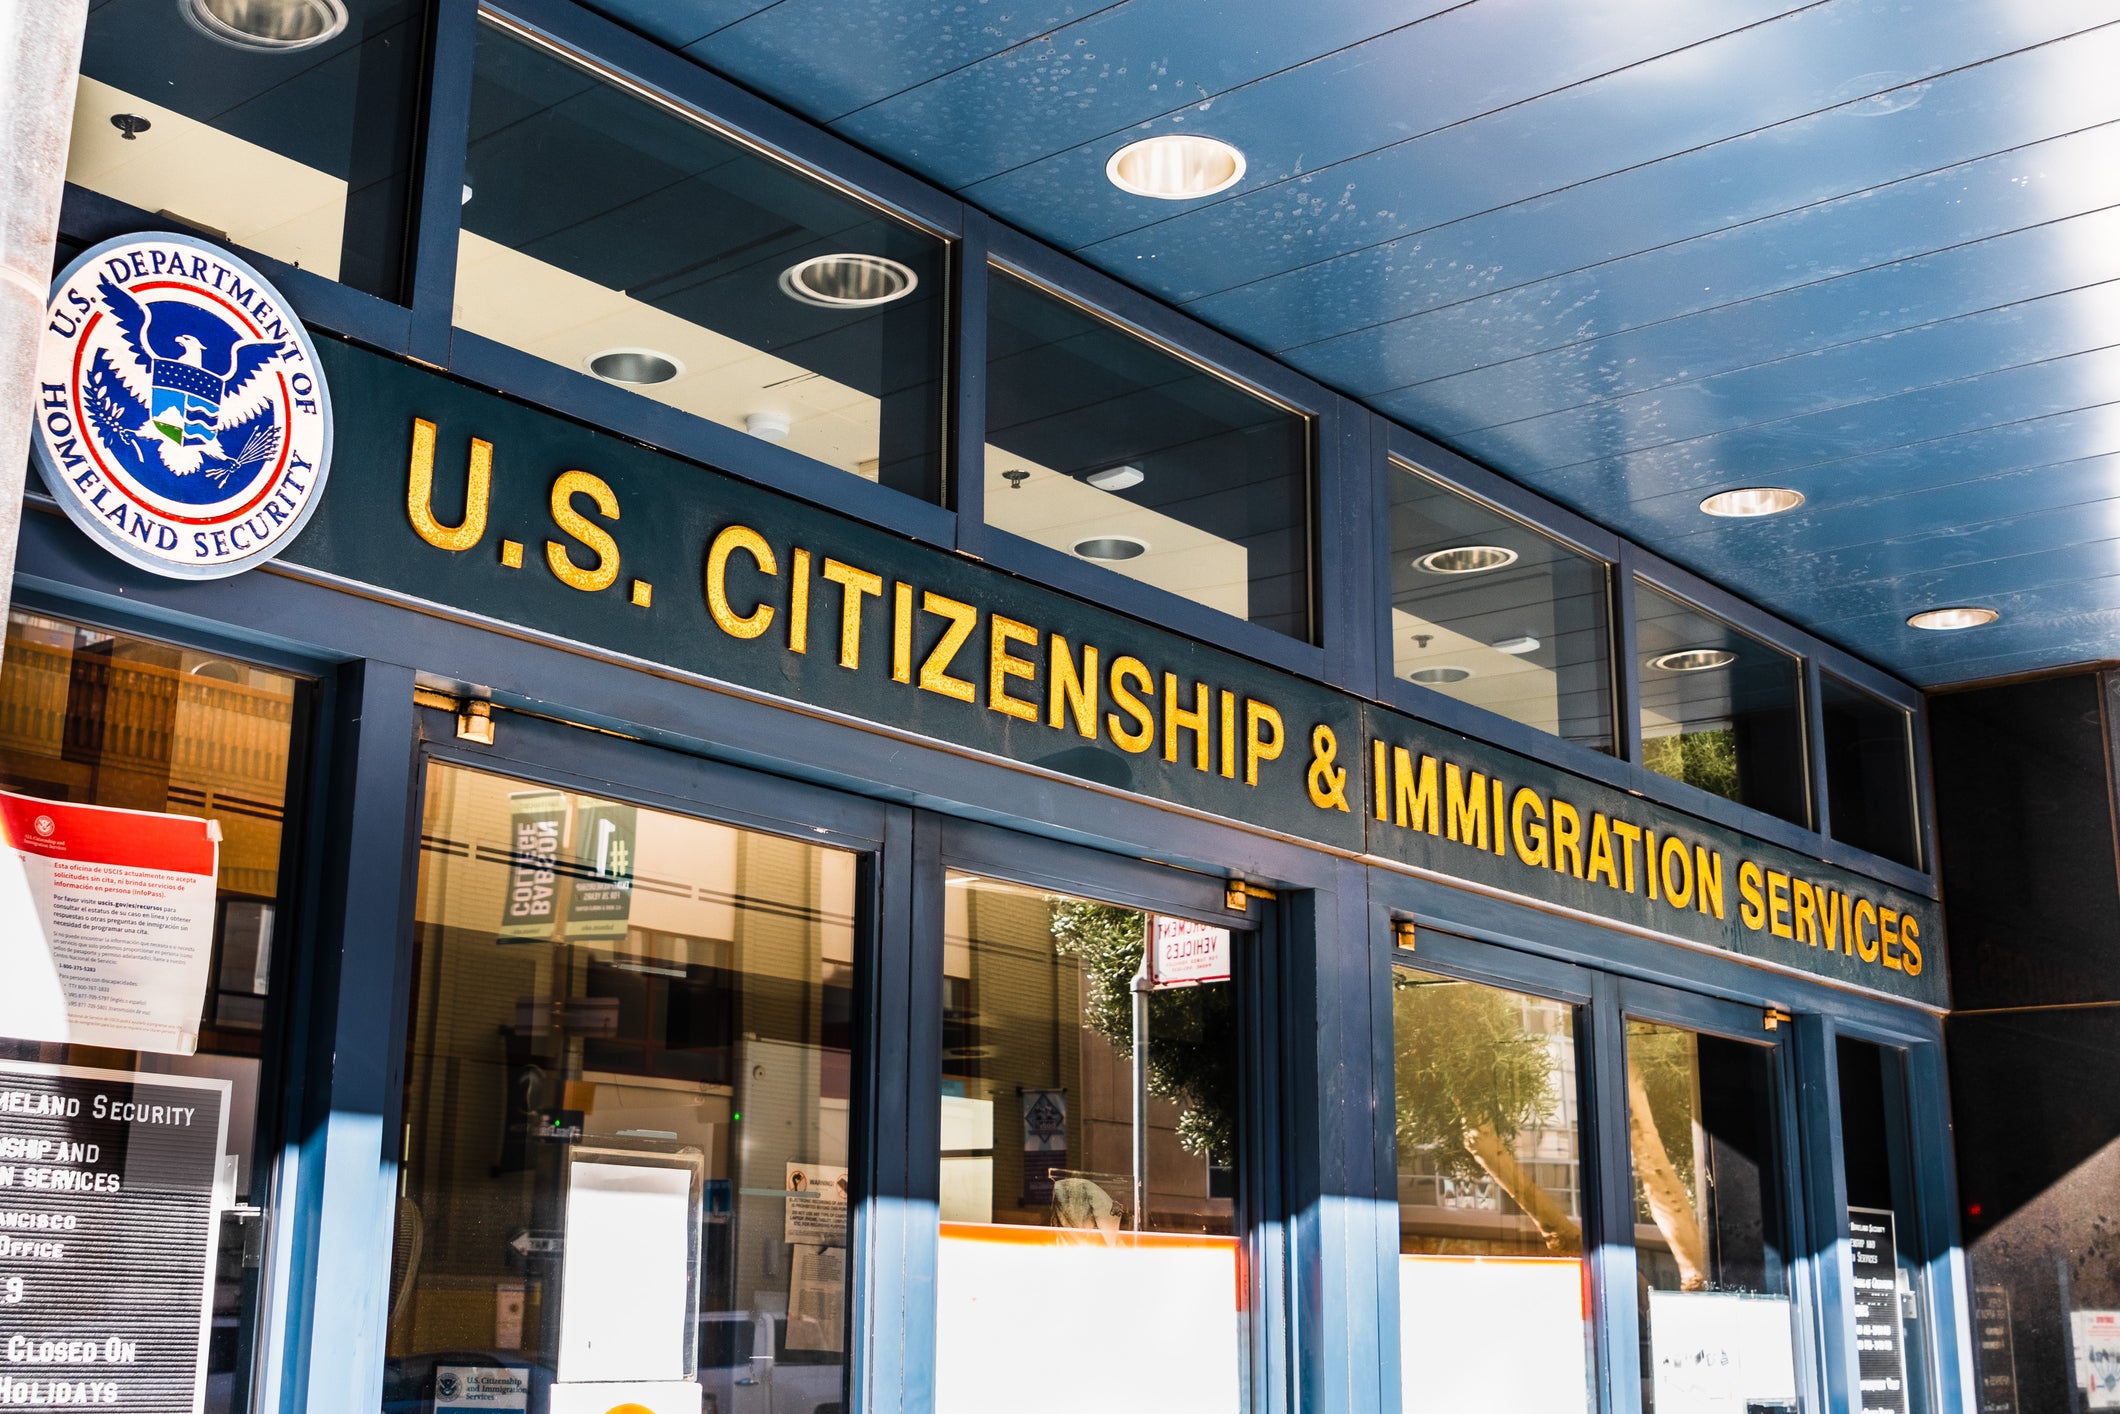 Building with glass doors, sign above the doors reads, U.S. Citizenship and Immigration Services.